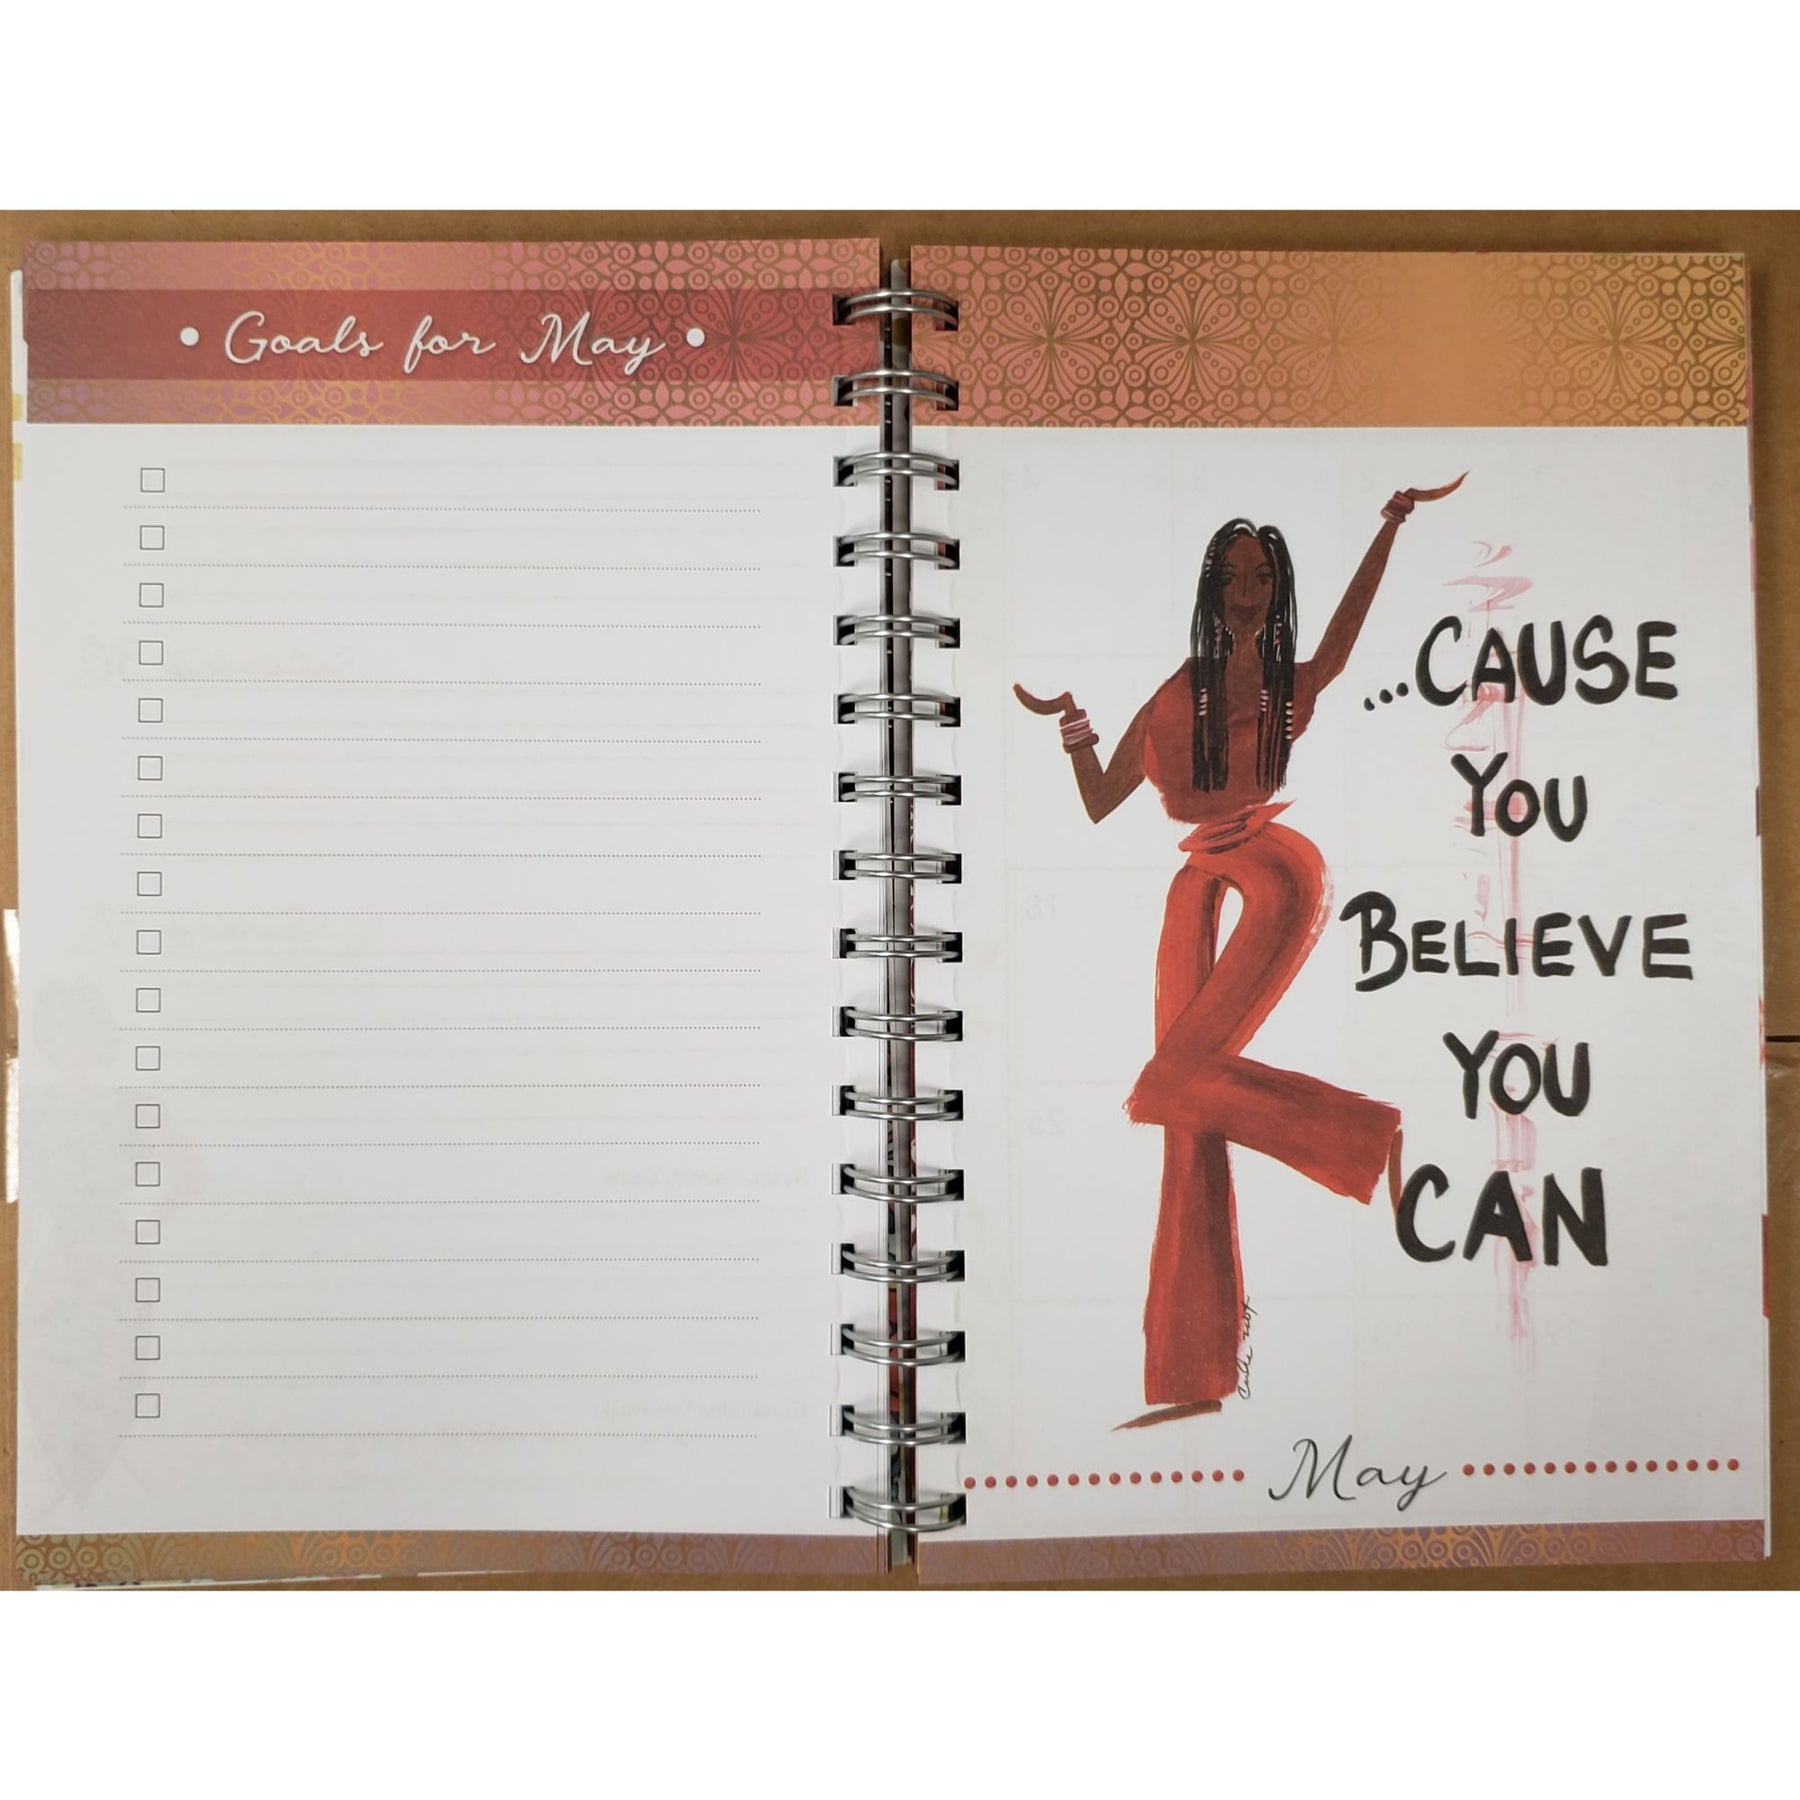 12 of 12: Believe You Can 2022 Weekly Planner-Weekly Planner-Cidne Wallace-8.25x5.375 inches-2022-The Black Art Depot